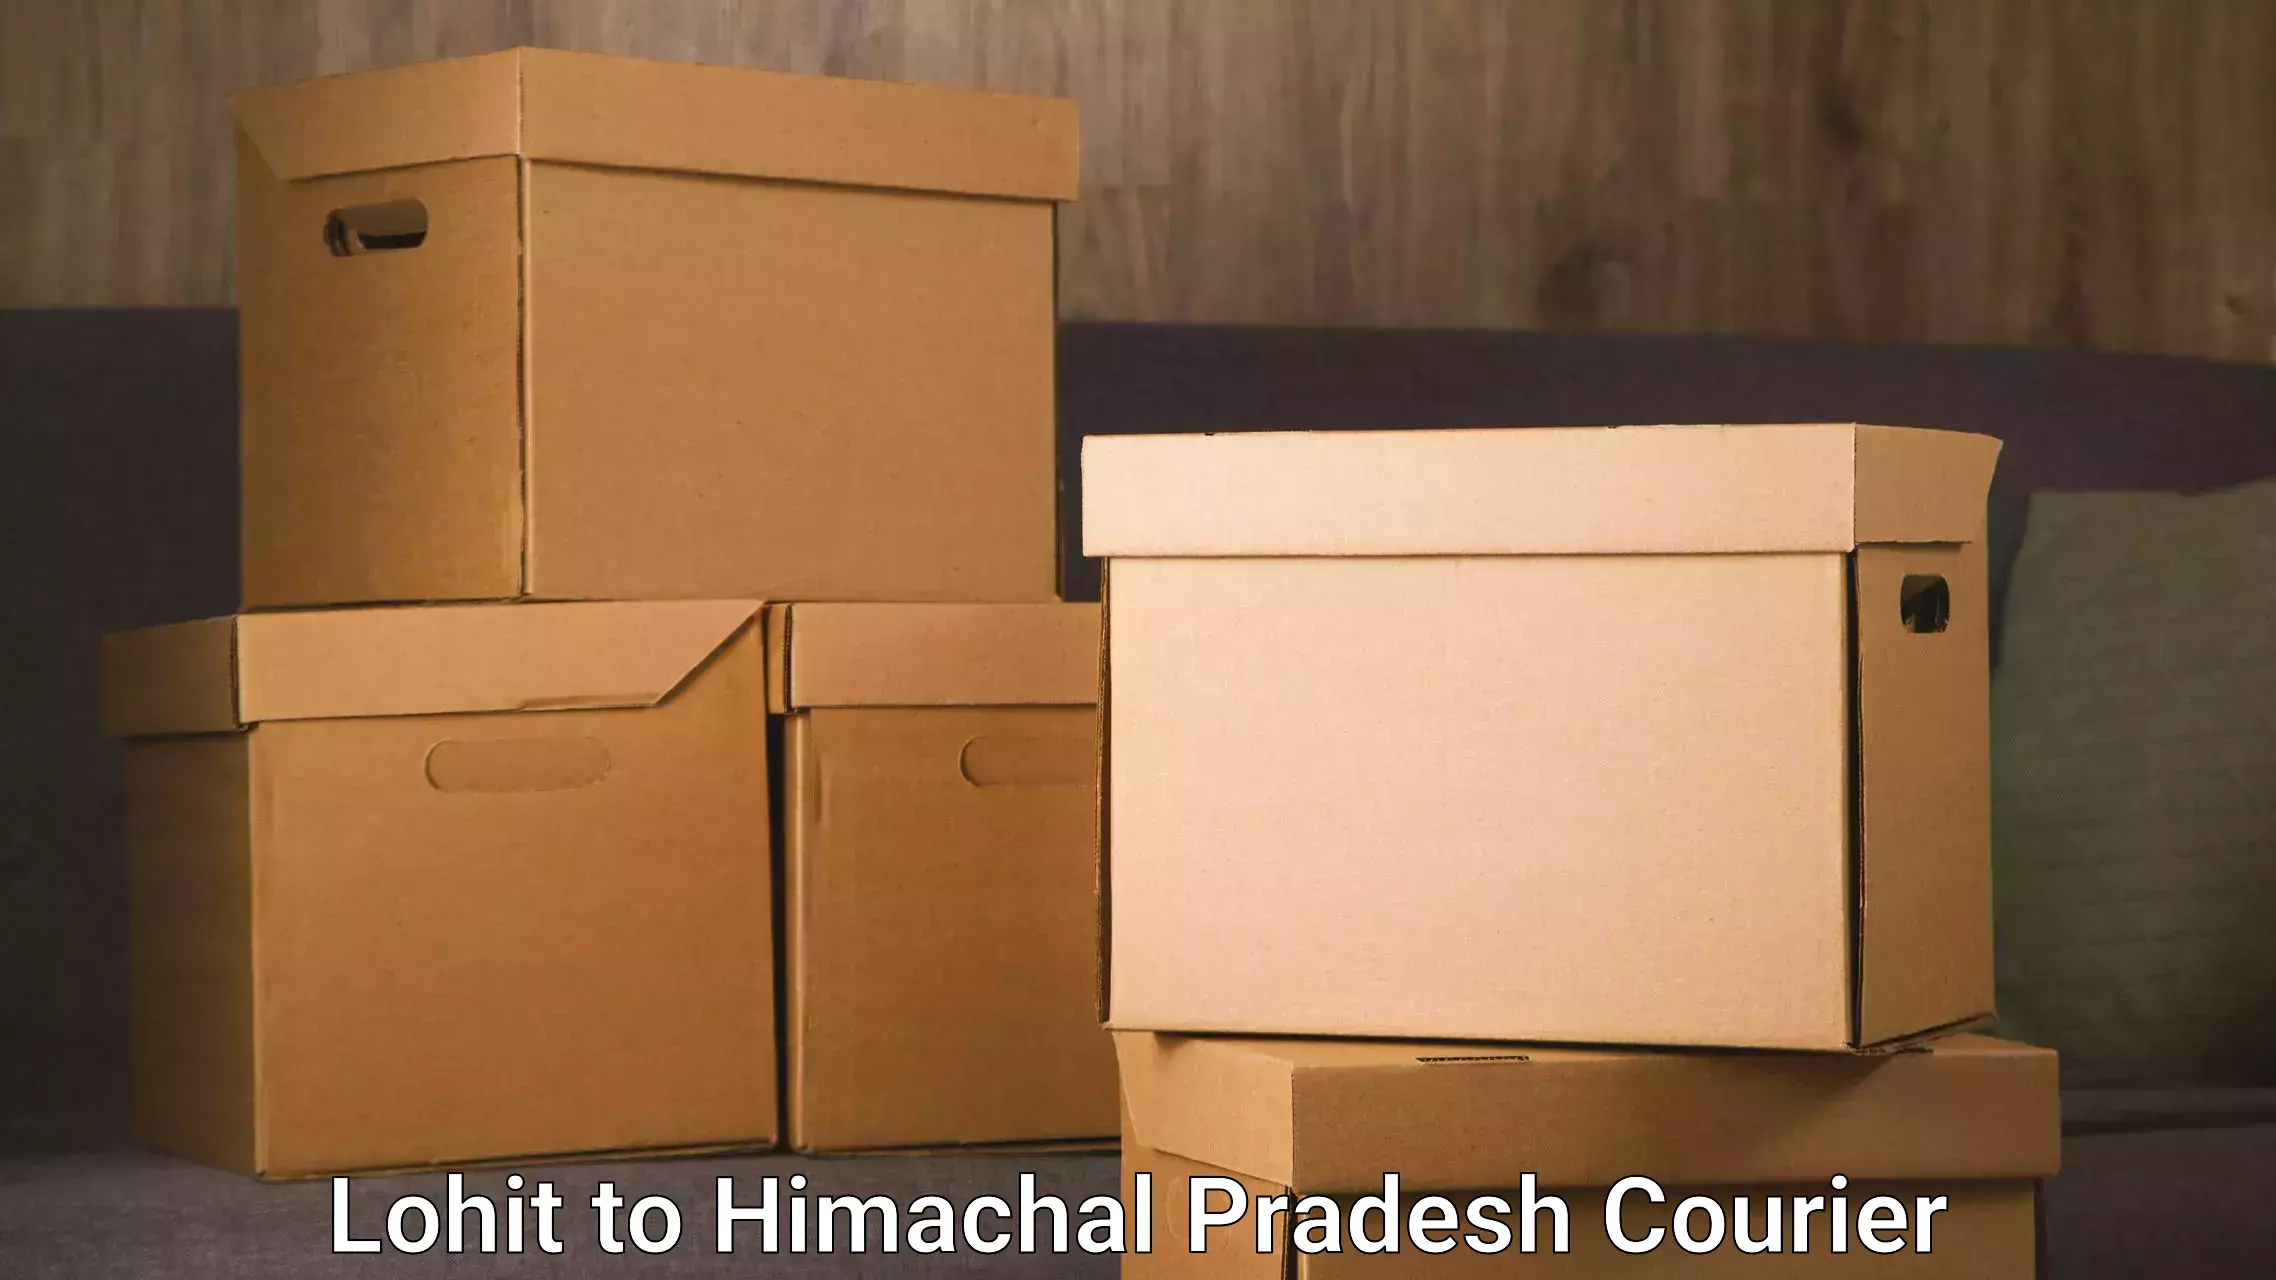 Round-the-clock parcel delivery Lohit to Himachal Pradesh